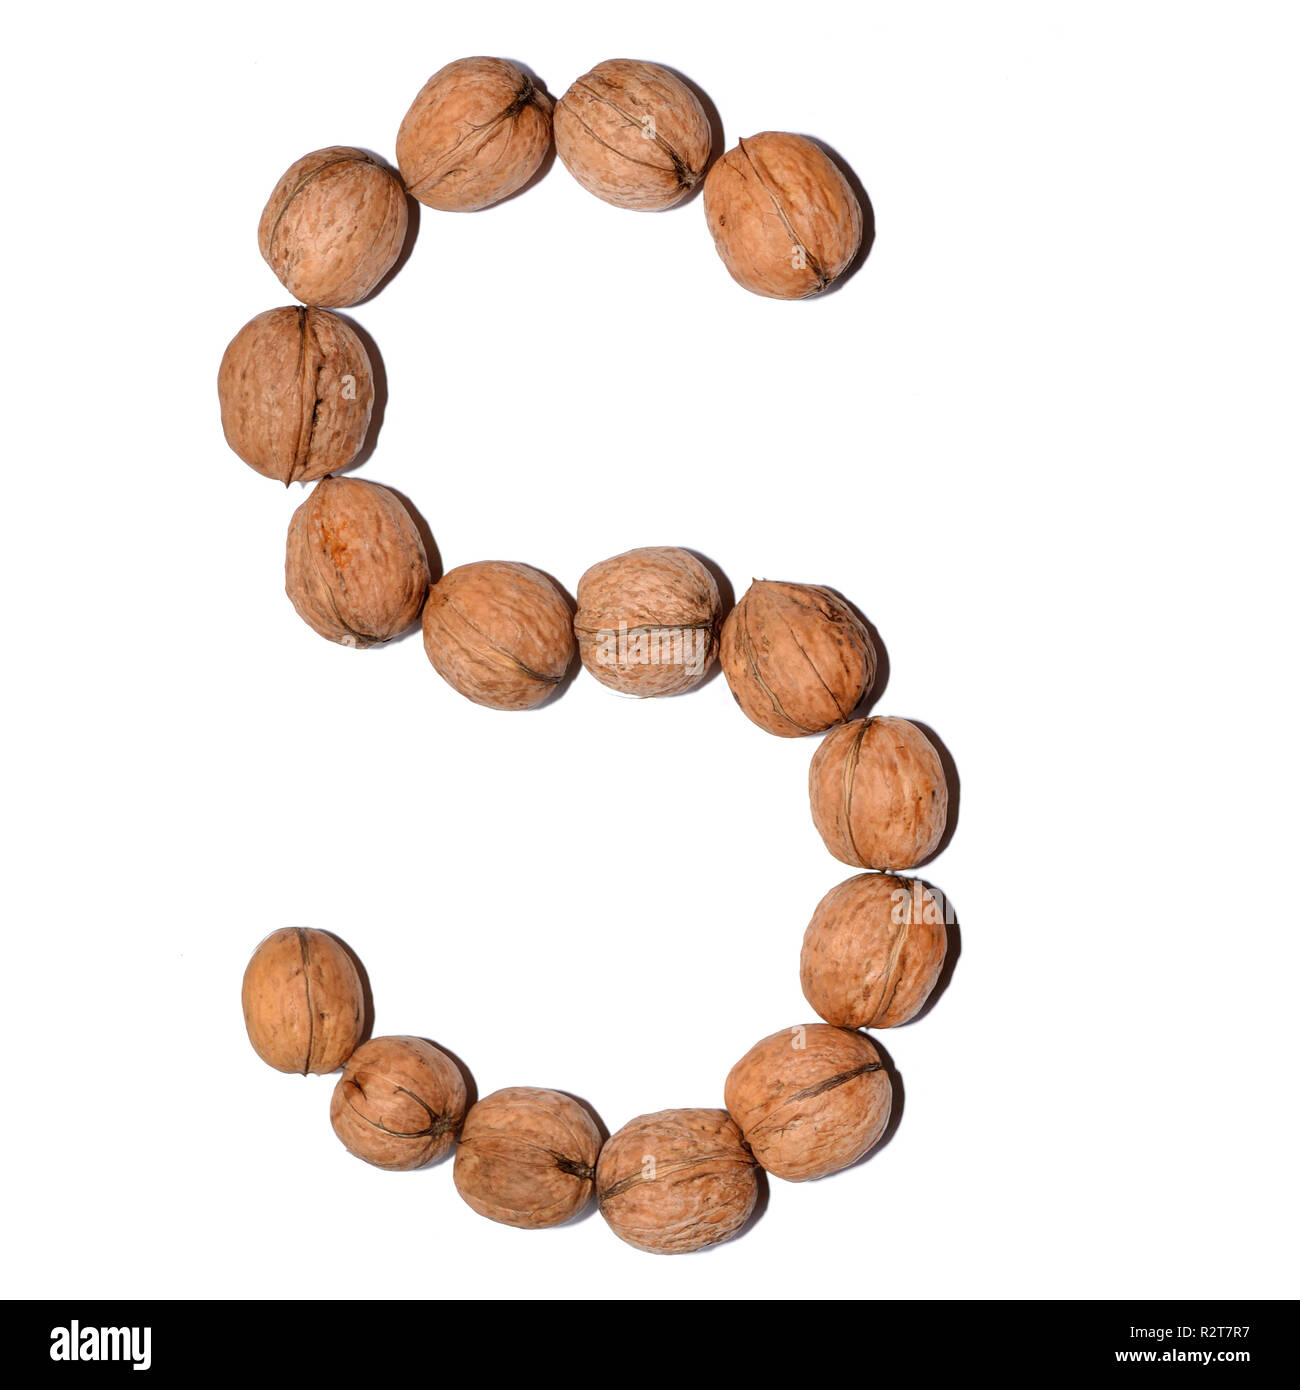 Letter S made with nuts to form a letter of the alphabet. Fruit letters on a white background. Stock Photo